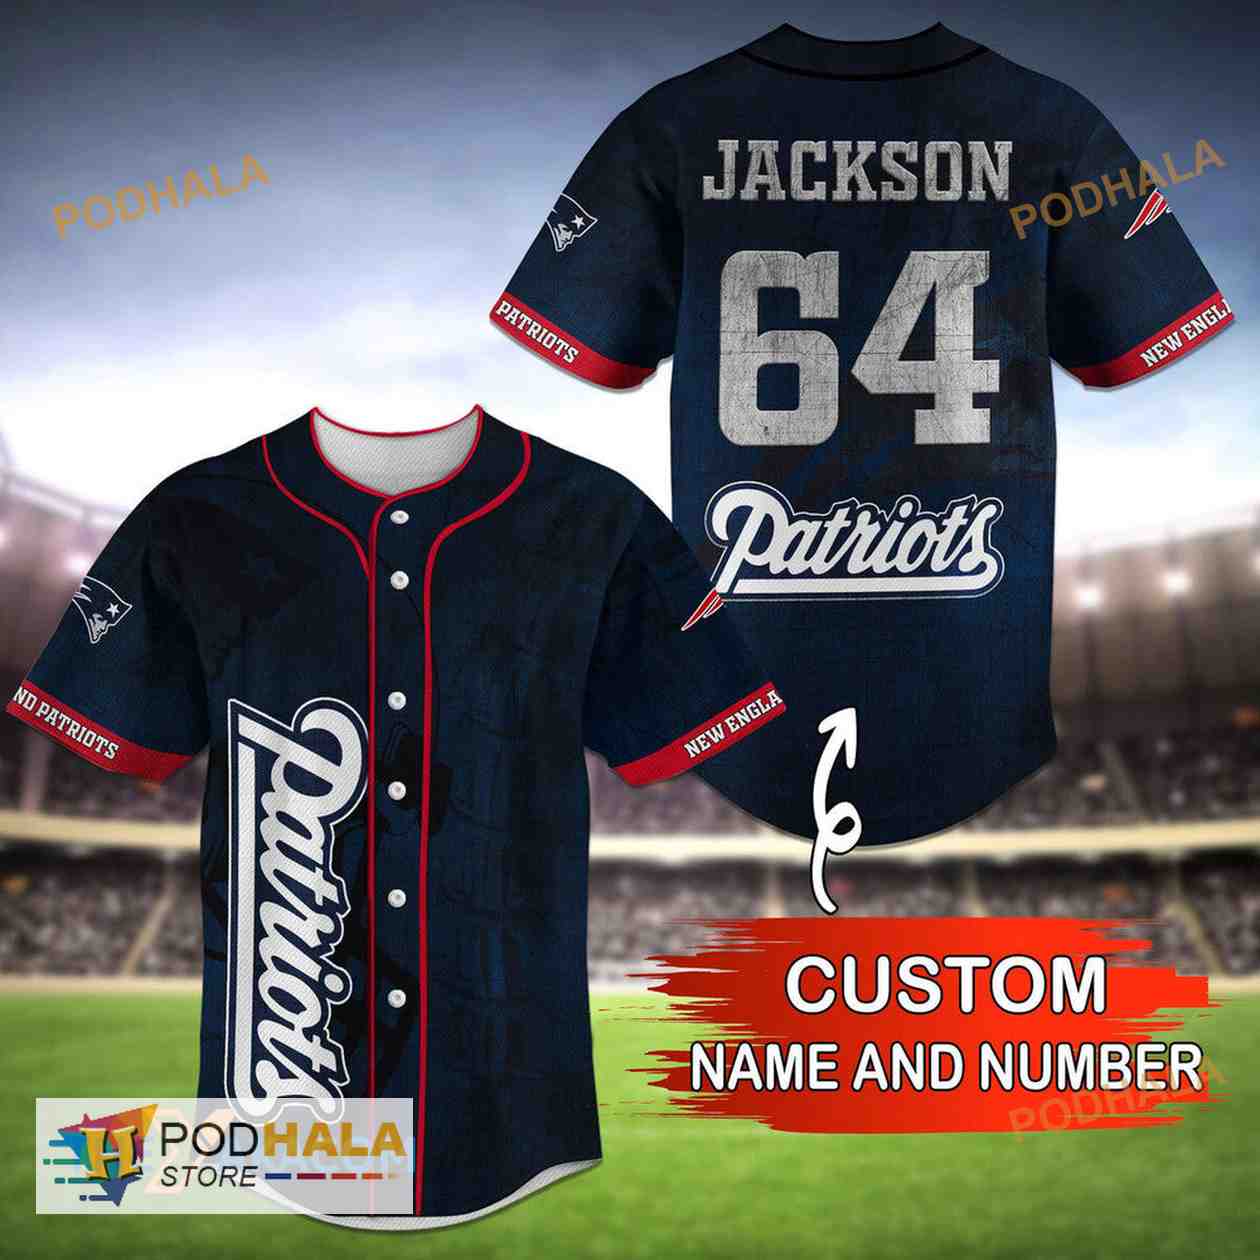 Personalized Name New England Patriots NFL Baseball Jersey Shirt